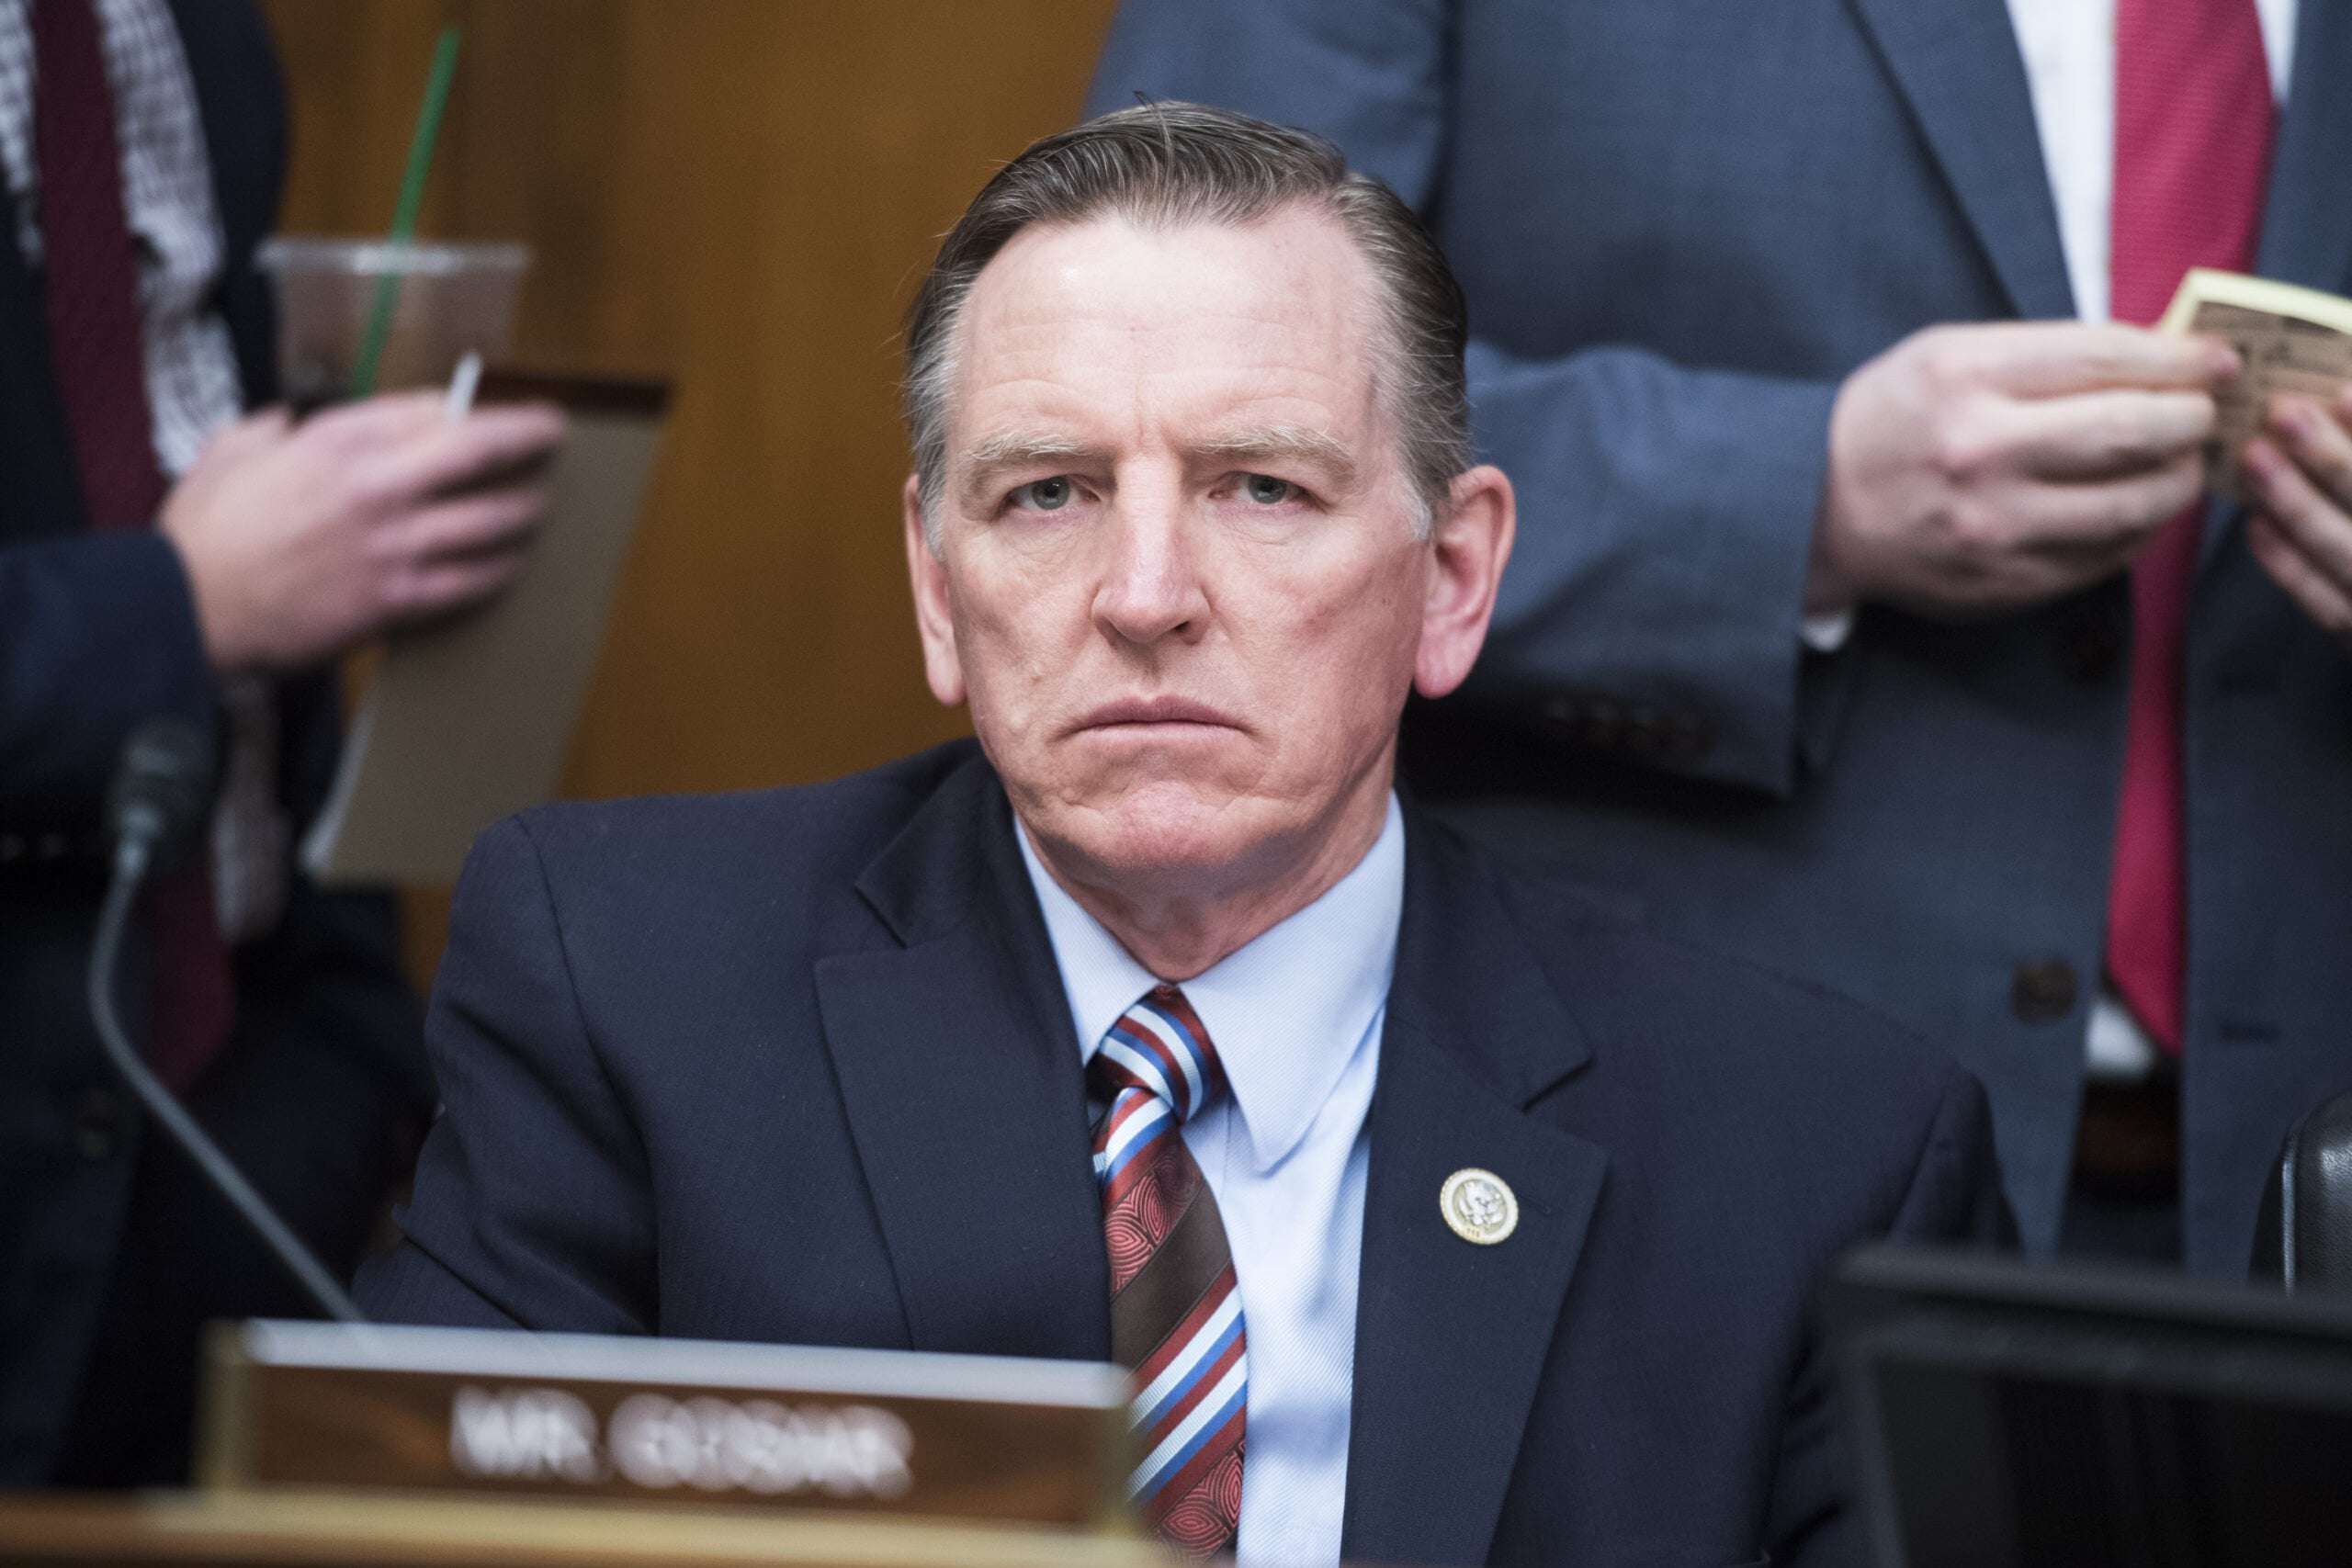 image for Rep. Paul Gosar Claims He Has Been ‘Smeared’ As A ‘Nazi’